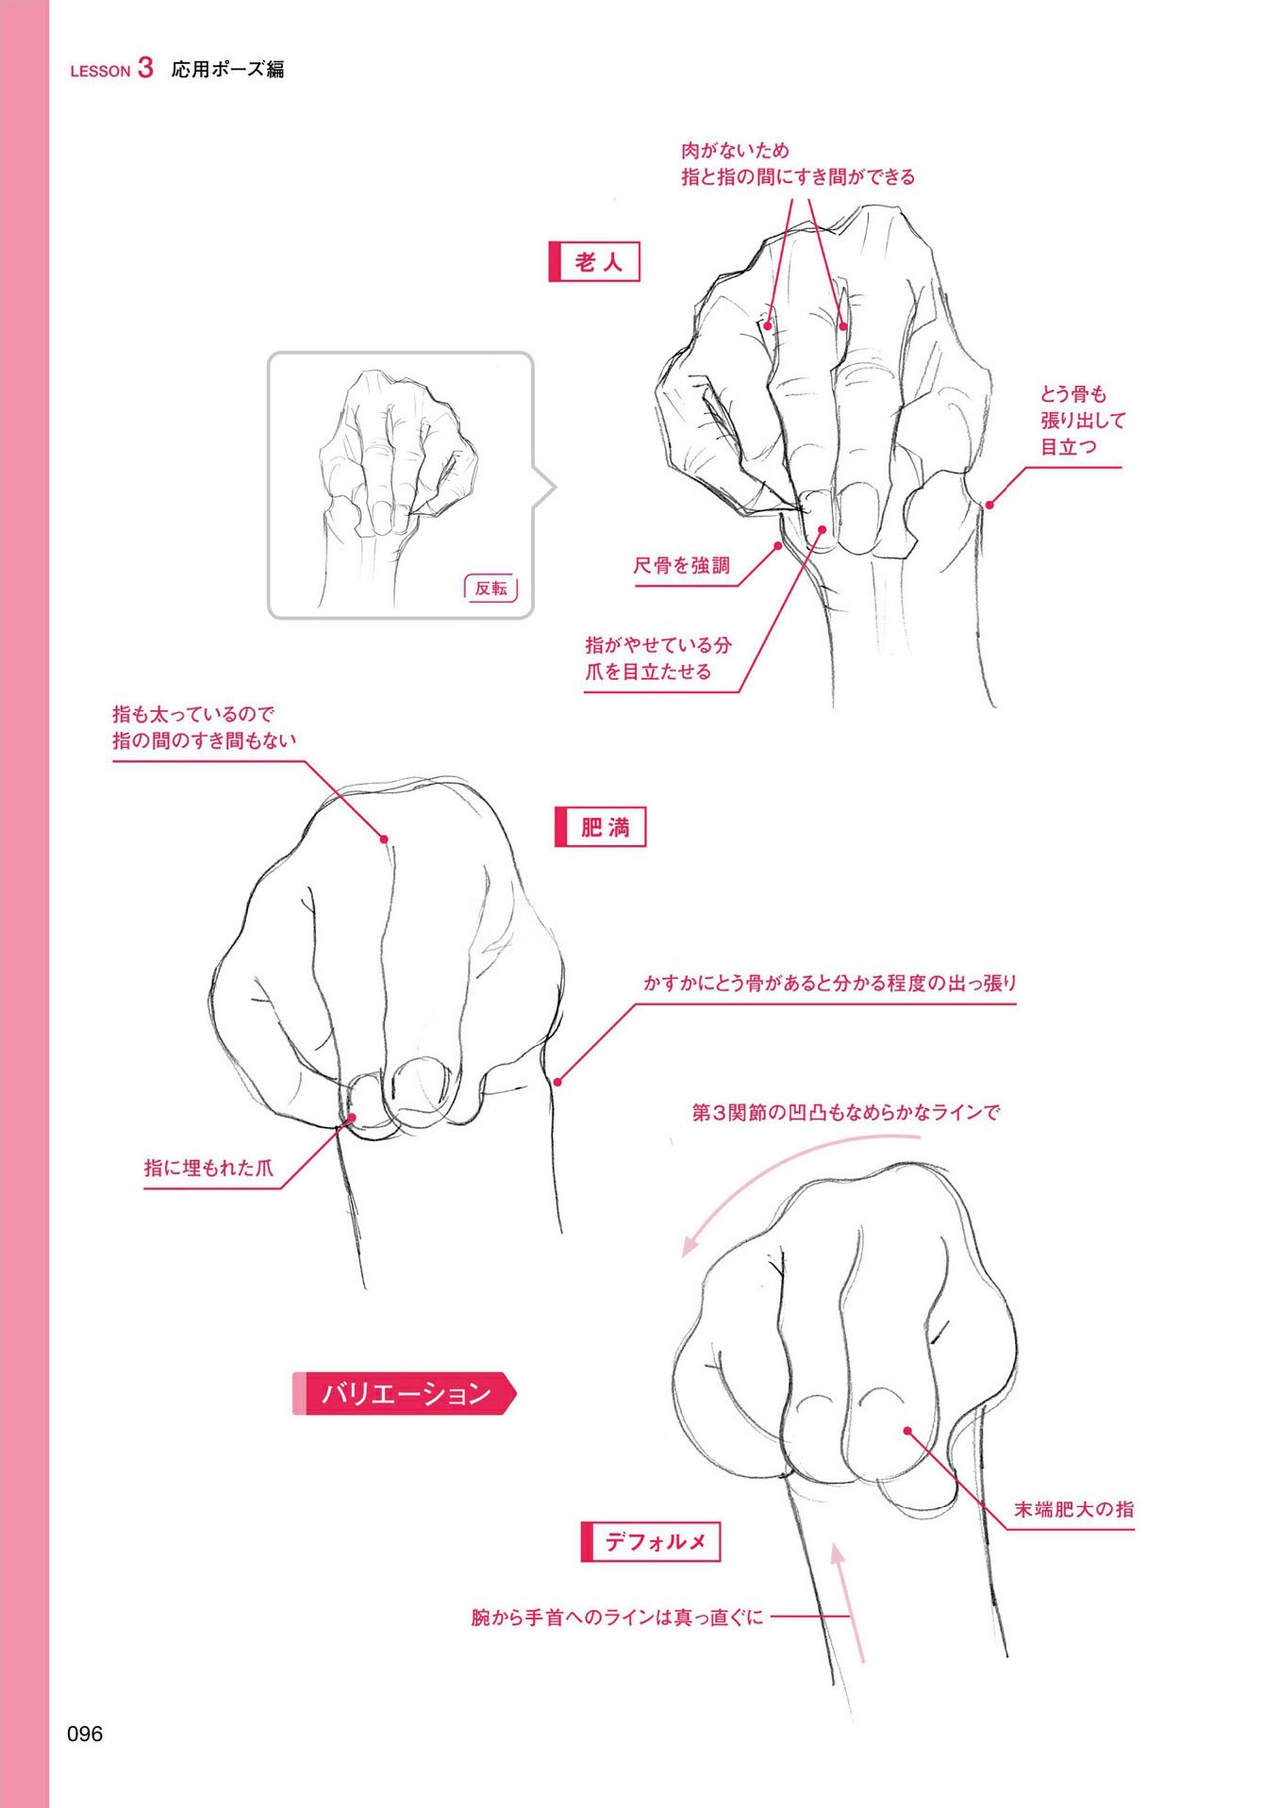 How to draw hands 96